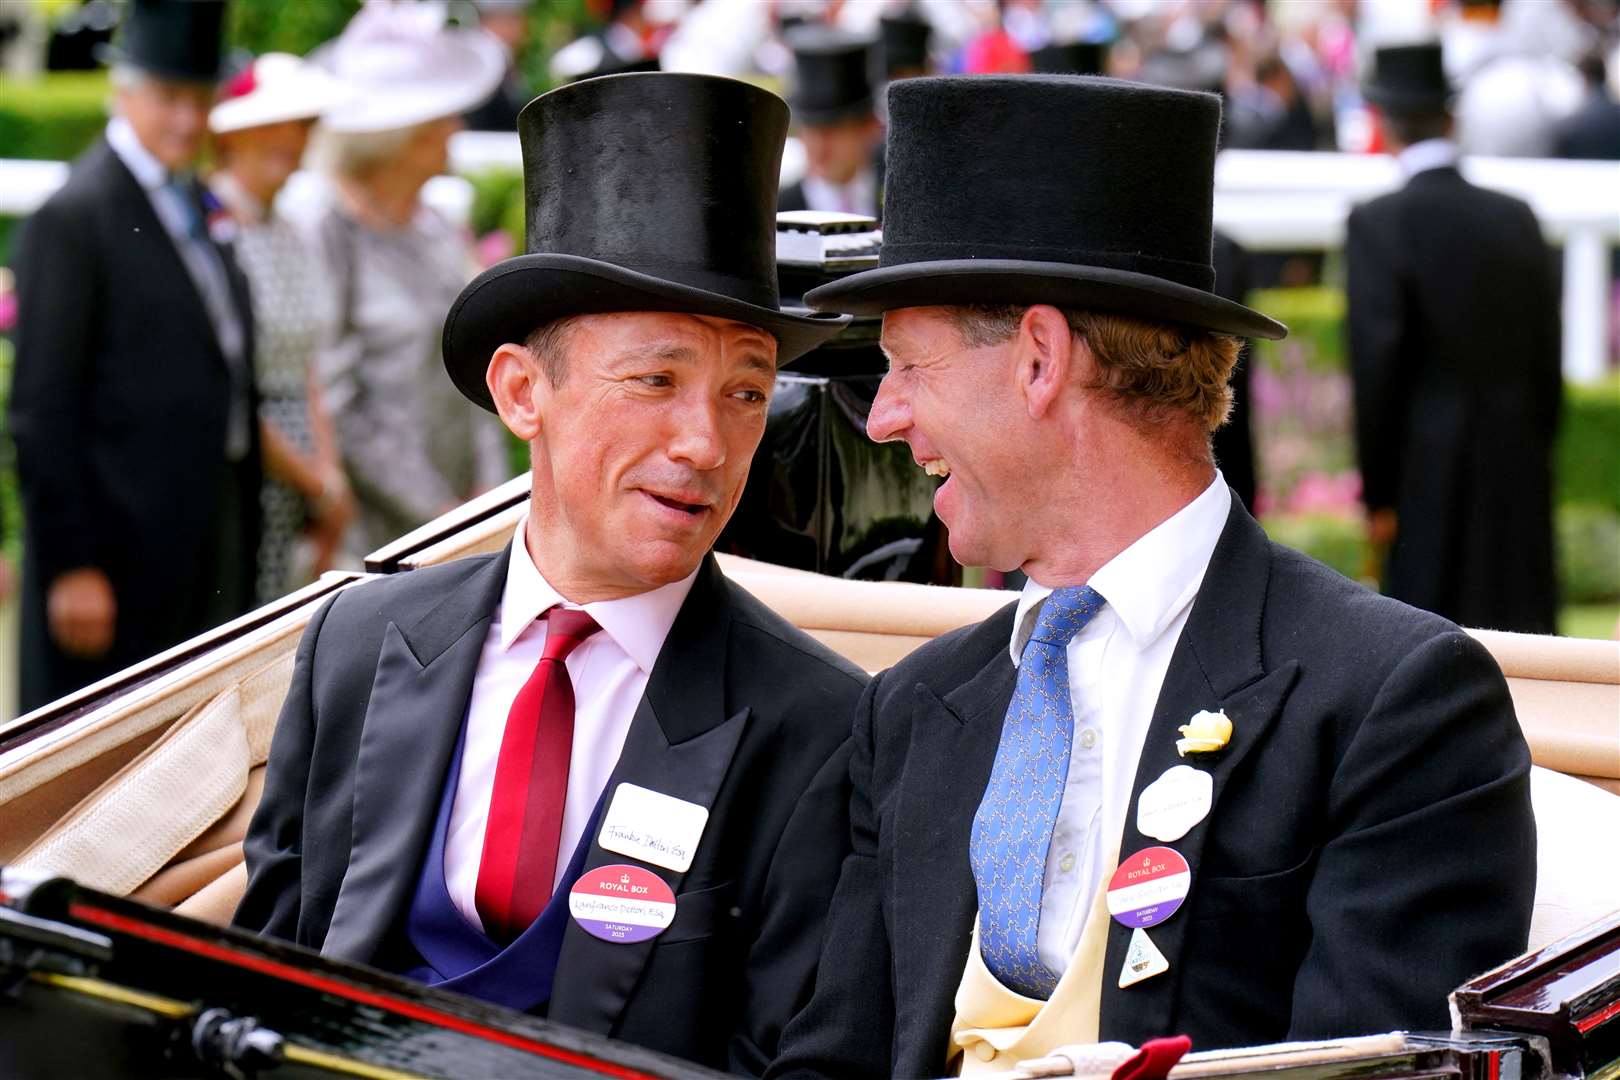 Frankie Dettori and Jamie Snowden arrive by carriage for day five of Royal Ascot (Jonathan Brady/PA)